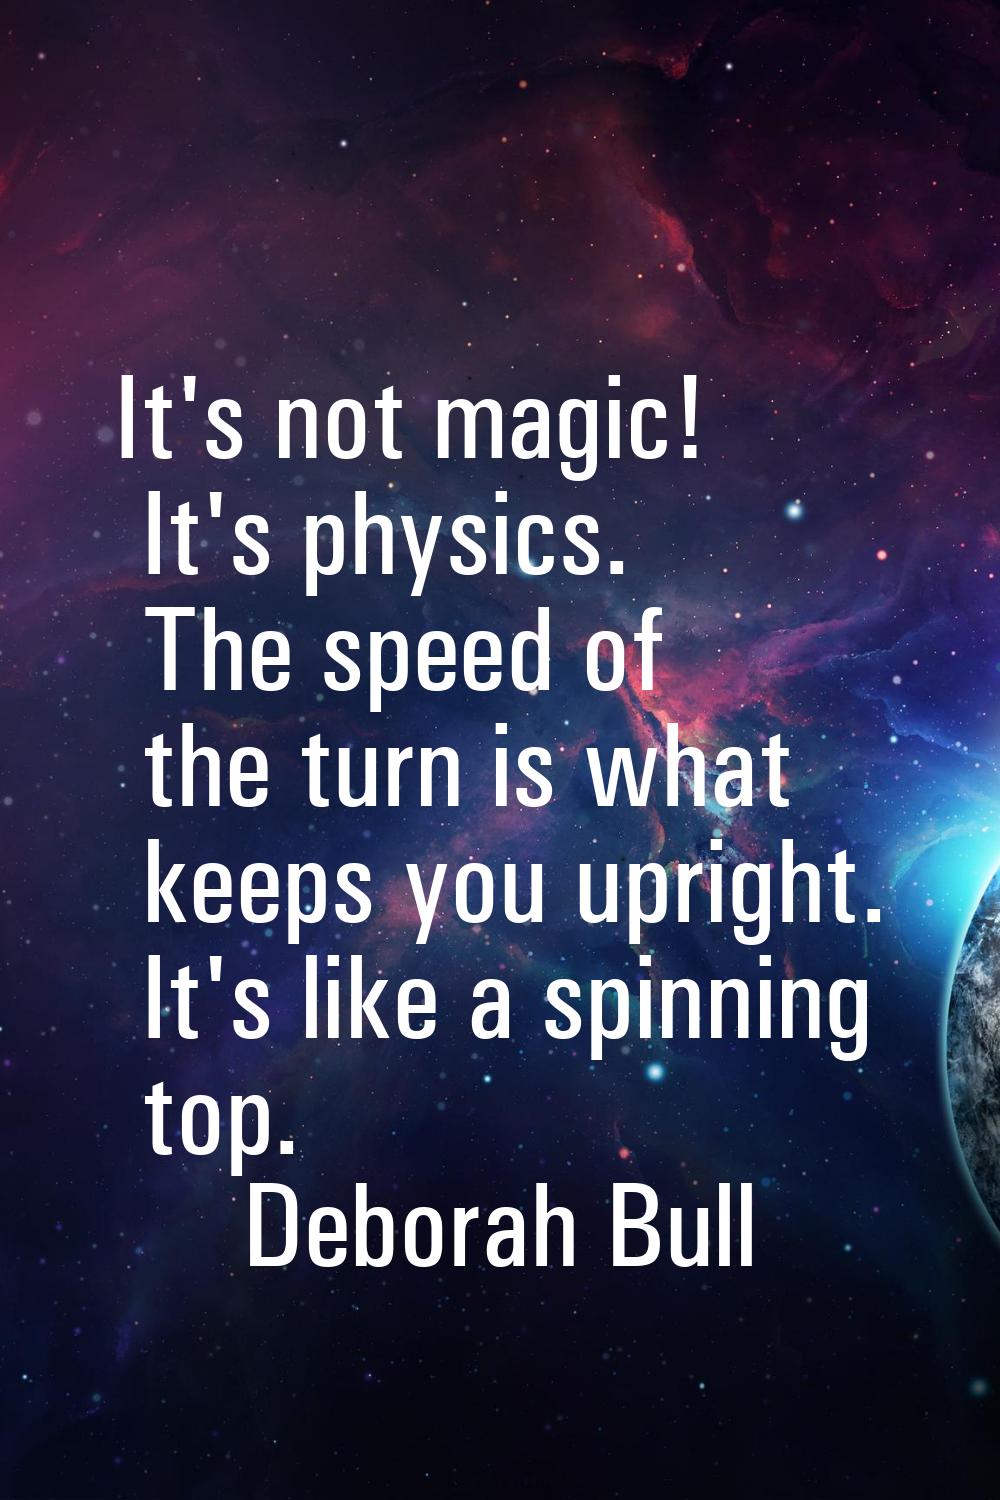 It's not magic! It's physics. The speed of the turn is what keeps you upright. It's like a spinning